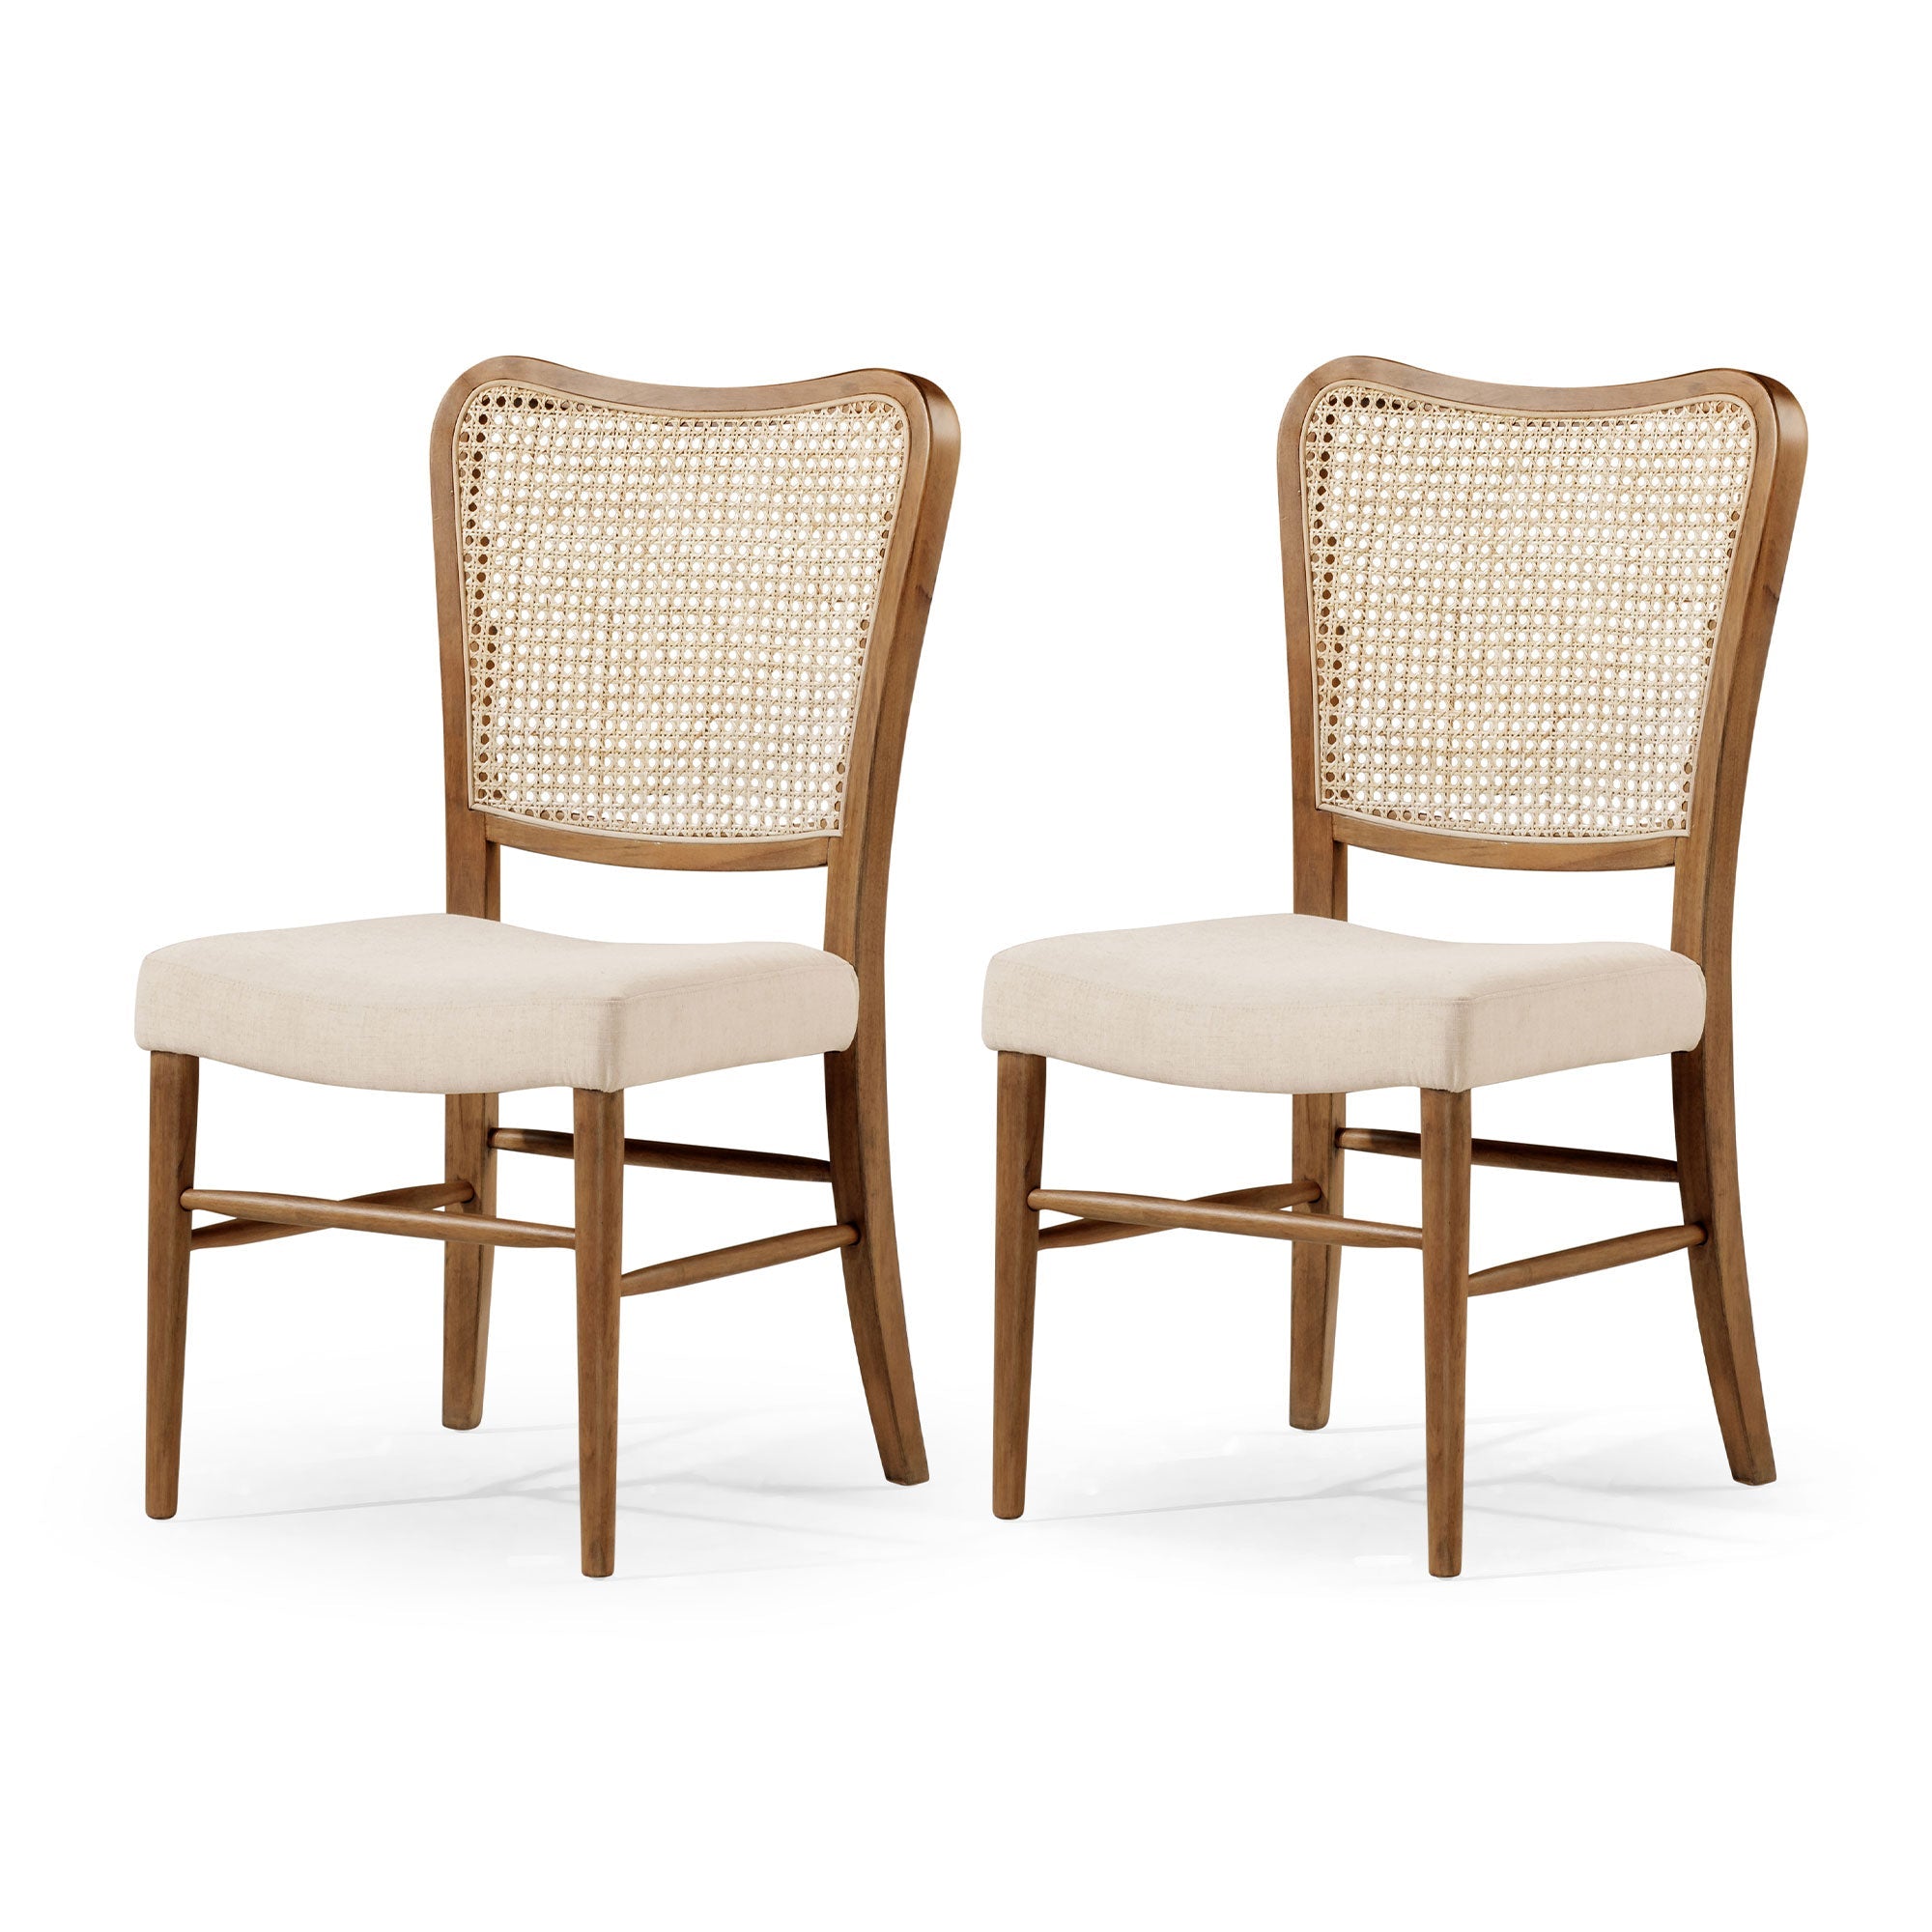 Maven-Lane-Vera-Wood-Dining-Chair,-Antique-Natural-&-Taupe-Linen-Fabric,-Set-of-2-Kitchen-&-Dining-Room-Chairs